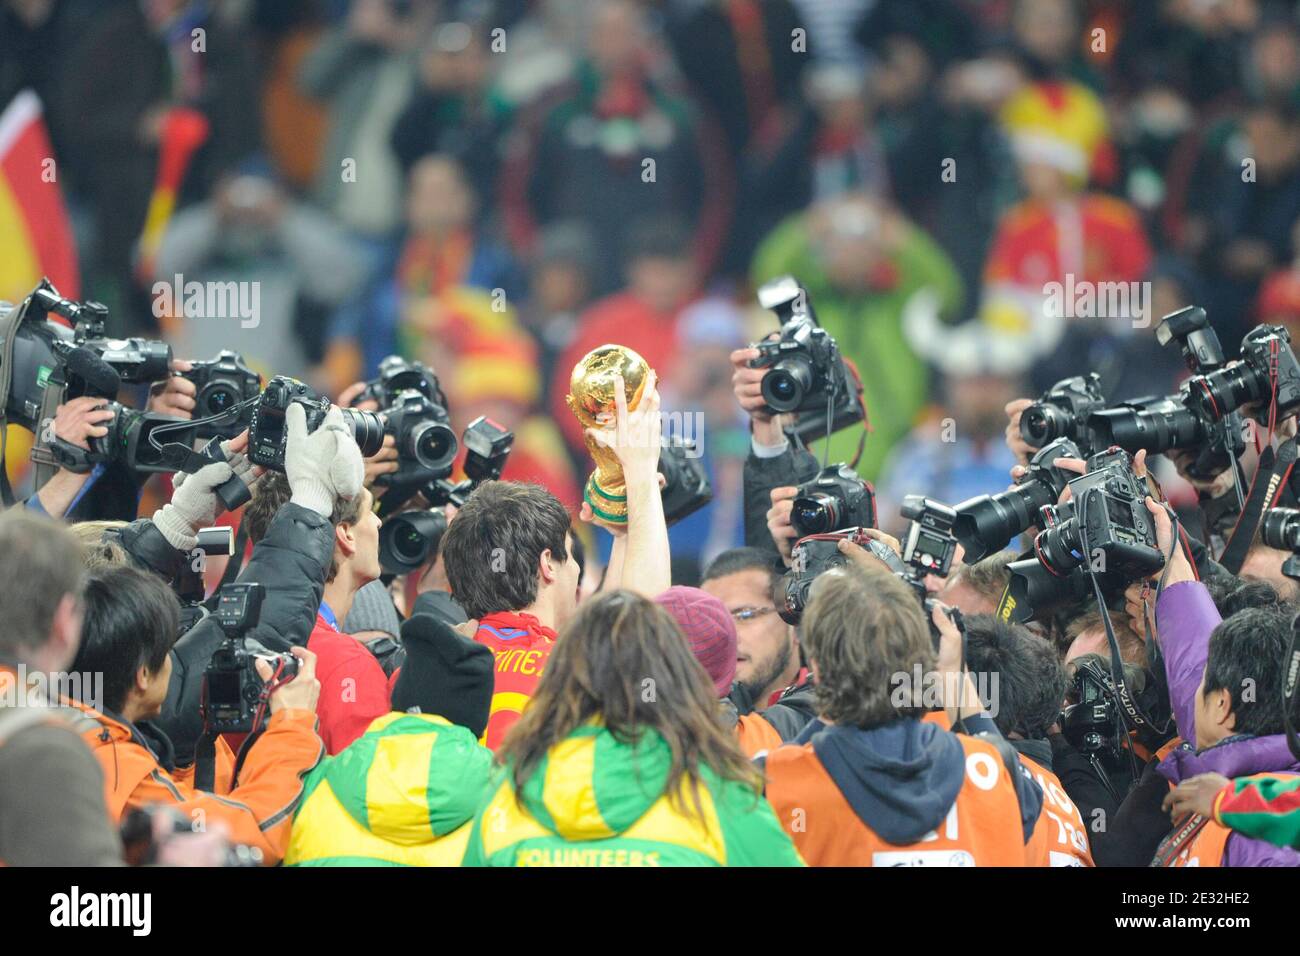 Spain's Andres Iniesta holds the World Cup after winning the 2010 FIFA World Cup South Africa Final Soccer match, Spain vs Netherlands at Soccer City football stadium in Johannesburg, South Africa on July 11th, 2010. Spain won 1-0. Photo by Henri Szwarc/ABACAPRESS.COM Stock Photo